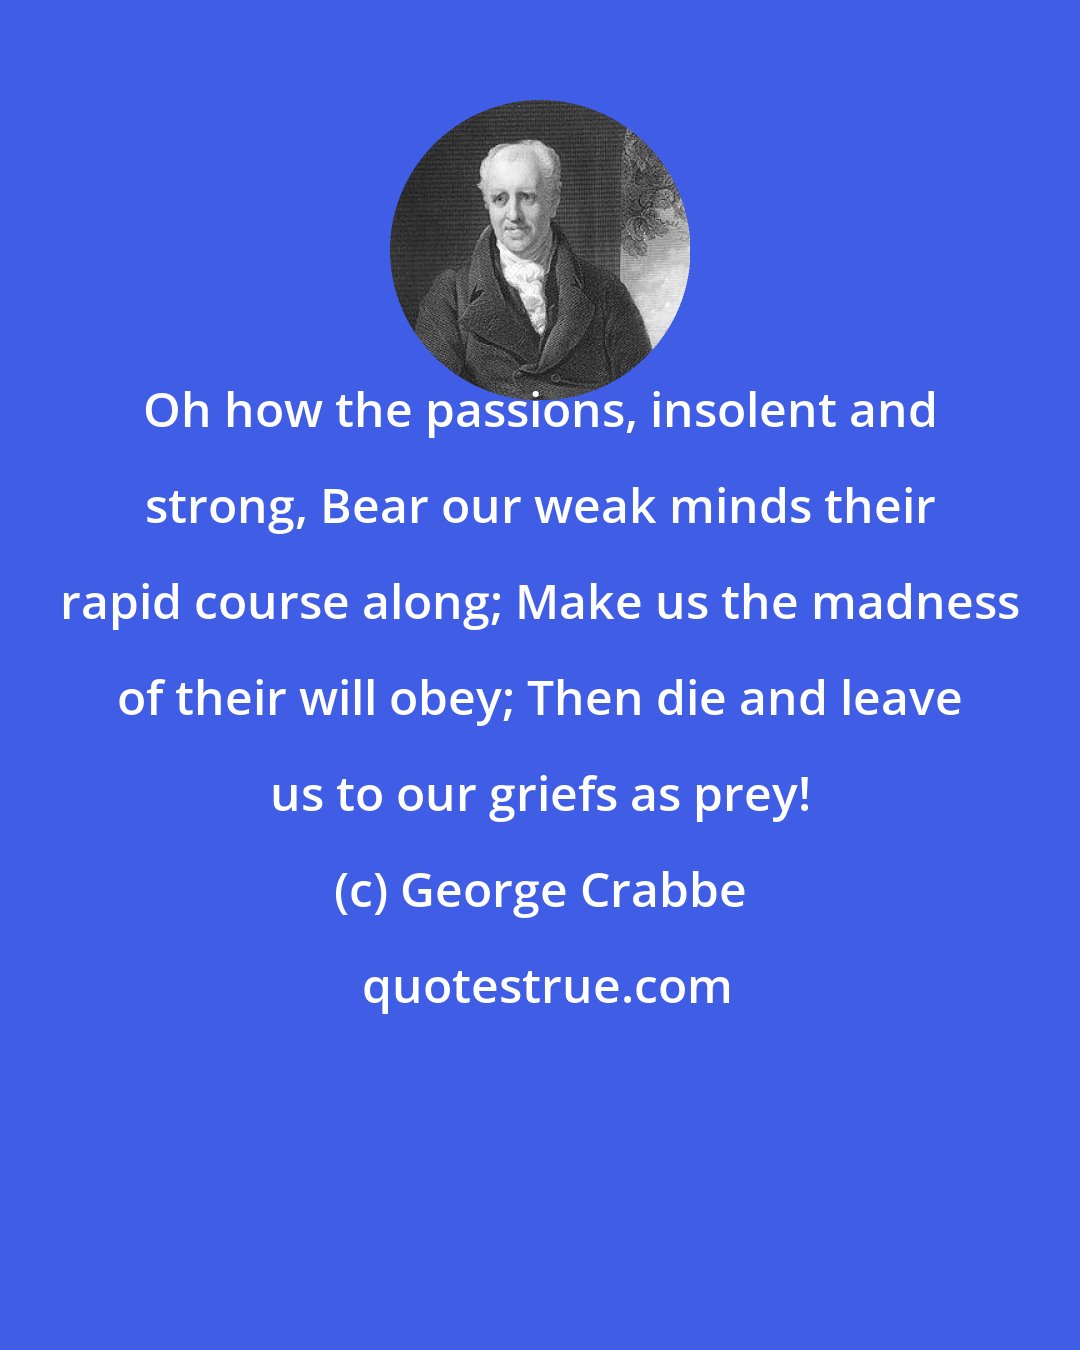 George Crabbe: Oh how the passions, insolent and strong, Bear our weak minds their rapid course along; Make us the madness of their will obey; Then die and leave us to our griefs as prey!